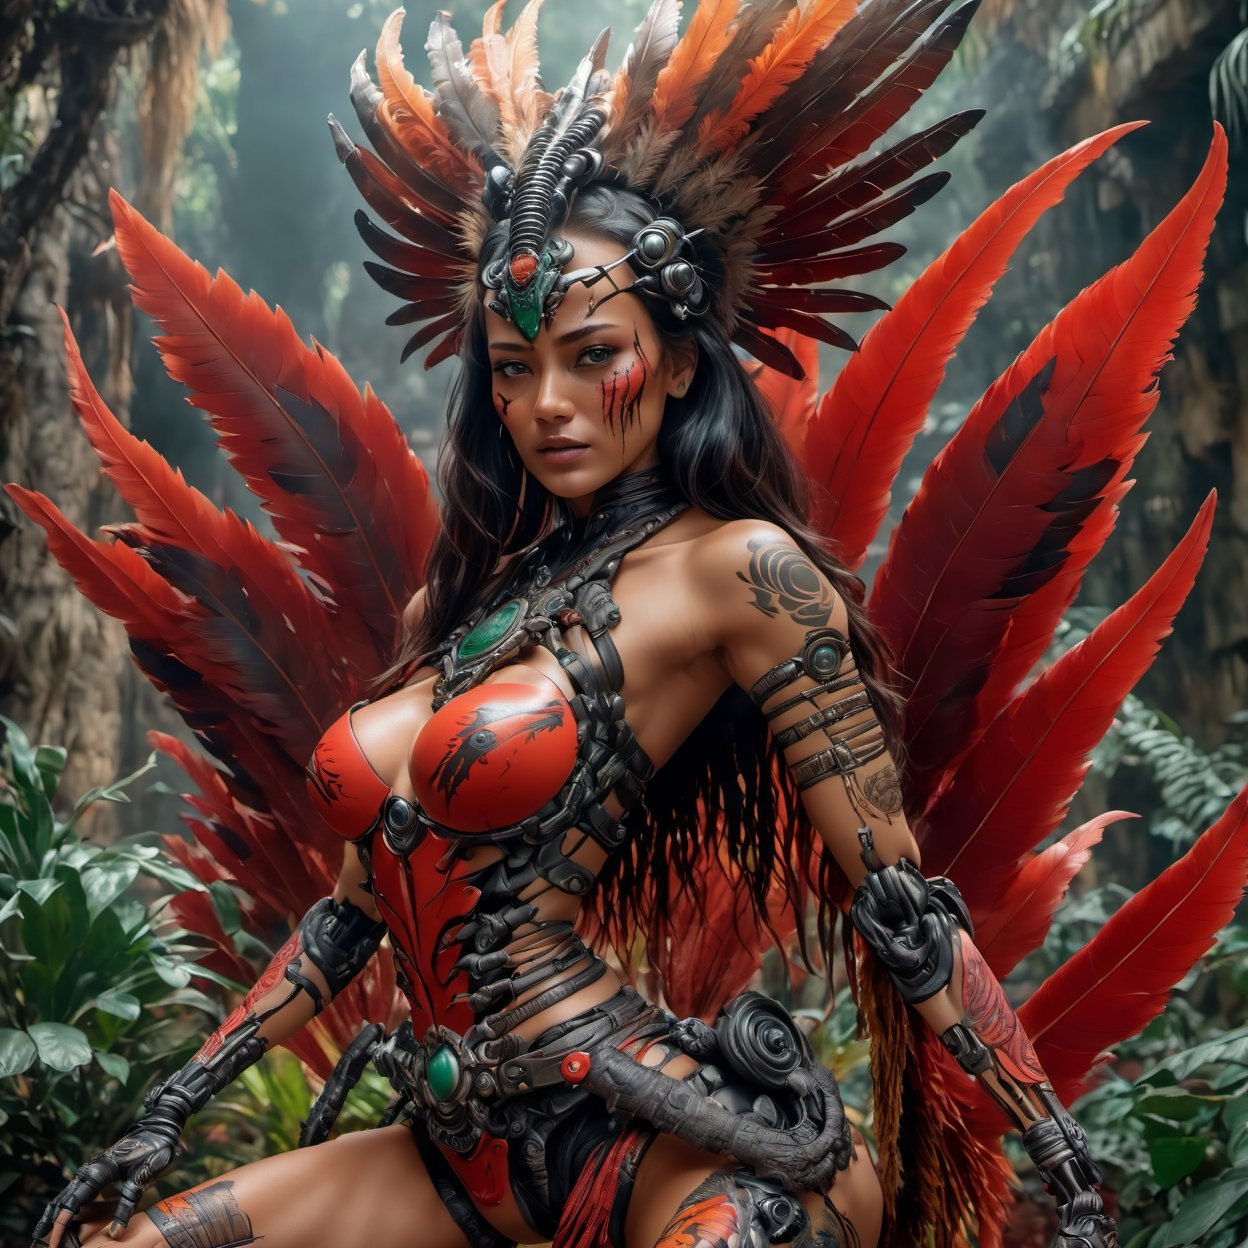 outpainting, a middle aged tribal women predator xenomorph combination, centred,in the style of boris vallejo, frank frazetta, bright contrasting colours, blank stare, ,cinematic,movie still,wide shot, feathered headdress, tribal facial tattoos ,breastclamp, wide shot, a middle aged tribal women, centred,in the style of Steve bisley, bright contrasting colours, blank stare, ,cinematic,movie still,wide shot, multi feathered headdress, facial tattoos ,breastclamp, tiger skin sash between her legs, multiple red blood stains on her upper torso, sunlit, misty, green jungle foliage amongst mayan ruins,Monster,JB64,WEARING HAUTE_COUTURE DESIGNER DRESS